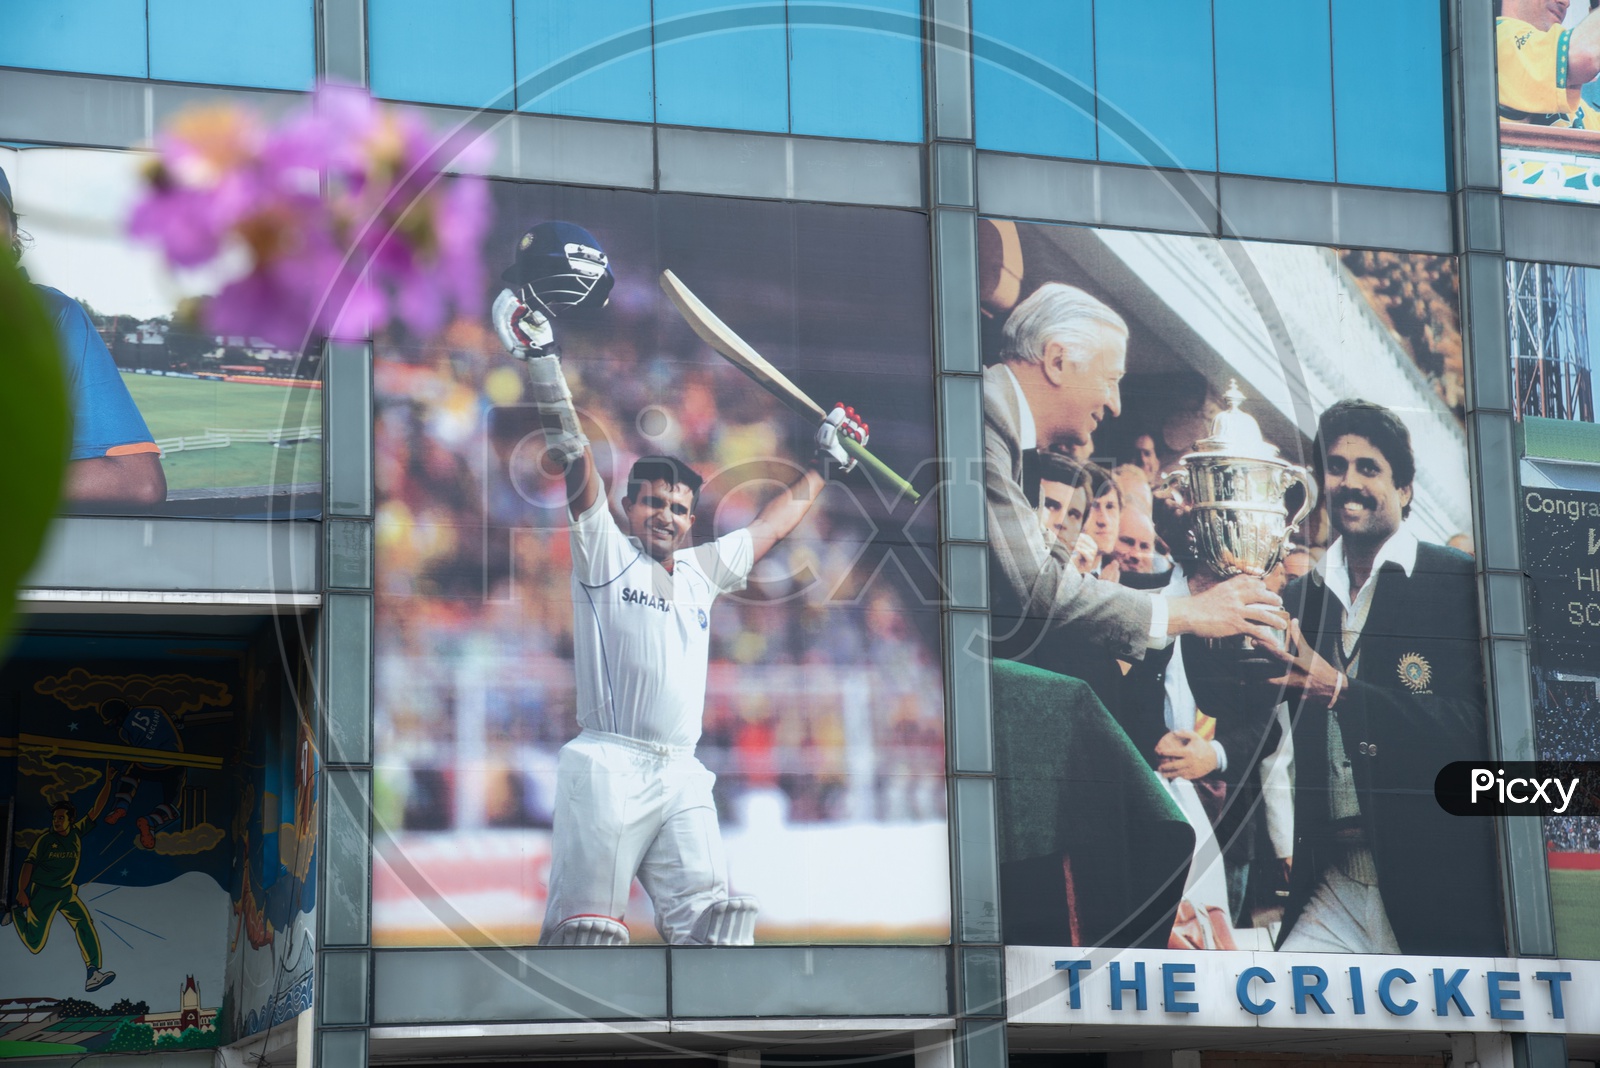 Cricket Dignitaries And Ganguly Pictures On the building Facade at Eden Gardens Cricket Stadium